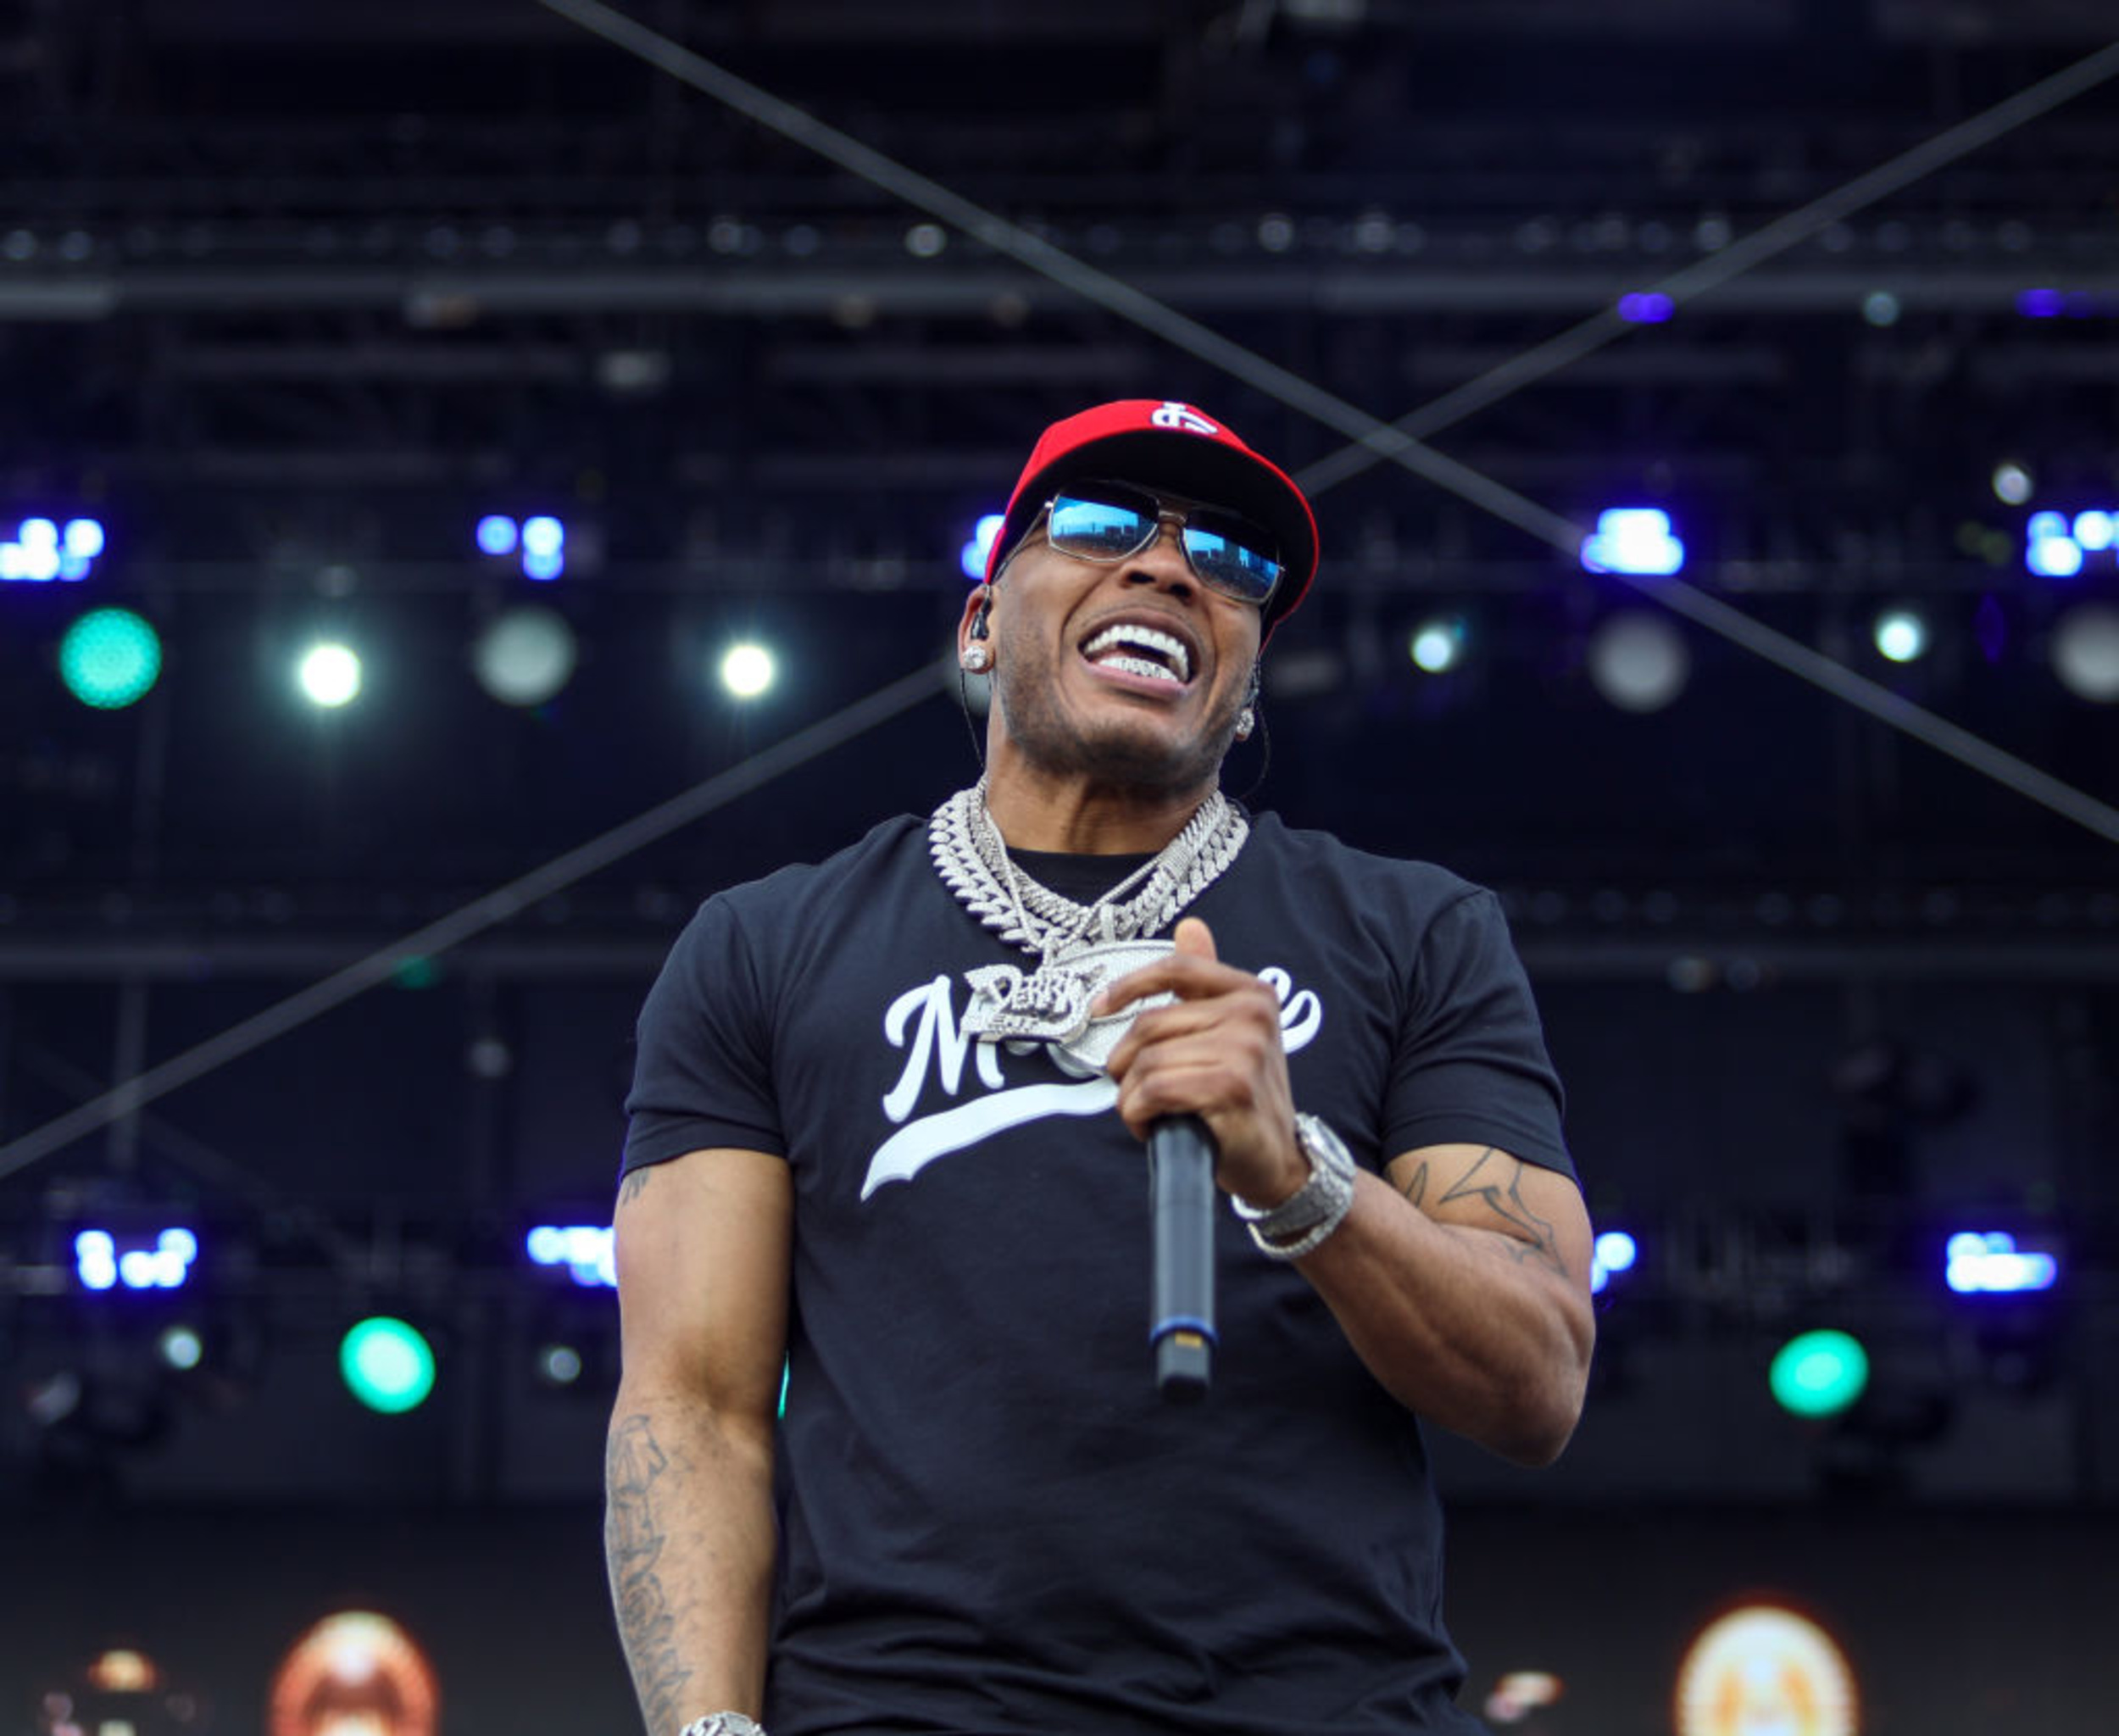 <p>On Nelly’s 2000 single <a href="https://www.youtube.com/watch?v=RtSDWq6HsJE" rel="noopener noreferrer">“Ride Wit Me,”</a> the rapper highlights his early career successes, including meeting women at the club, sitting on flights next to Vanna White, and driving fly cars. As he raps on the hook, “If you wanna go and take a ride with me / We 3-wheelin' in the fo’ with the gold D’s / Oh, why do I live this way? / Hey, must be the money!” </p><p>You may also like: <a href='https://www.yardbarker.com/entertainment/articles/27_of_the_geekiest_celebrities_120623/s1__38989713'>27 of the geekiest celebrities</a></p>